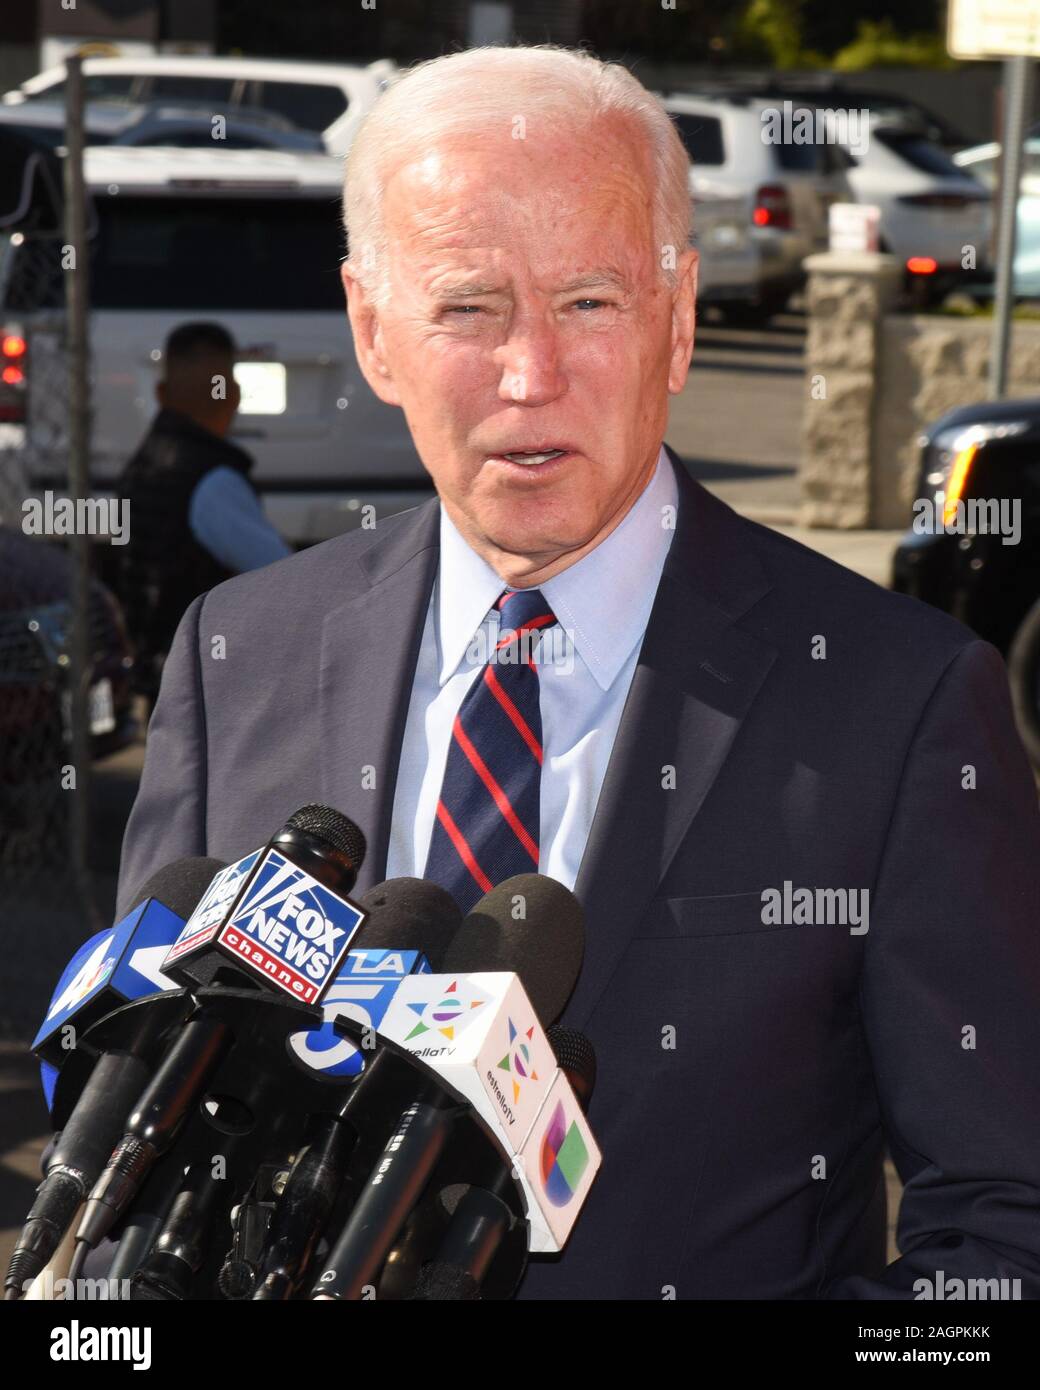 Los Angeles, United States. 20th Dec, 2019. Former Vice President Joe Biden attends a Biden for President Campaign Fund Raising Event at Guelaguetza on December 20, 2019 in Los Angeles, California. Credit: The Photo Access/Alamy Live News Stock Photo